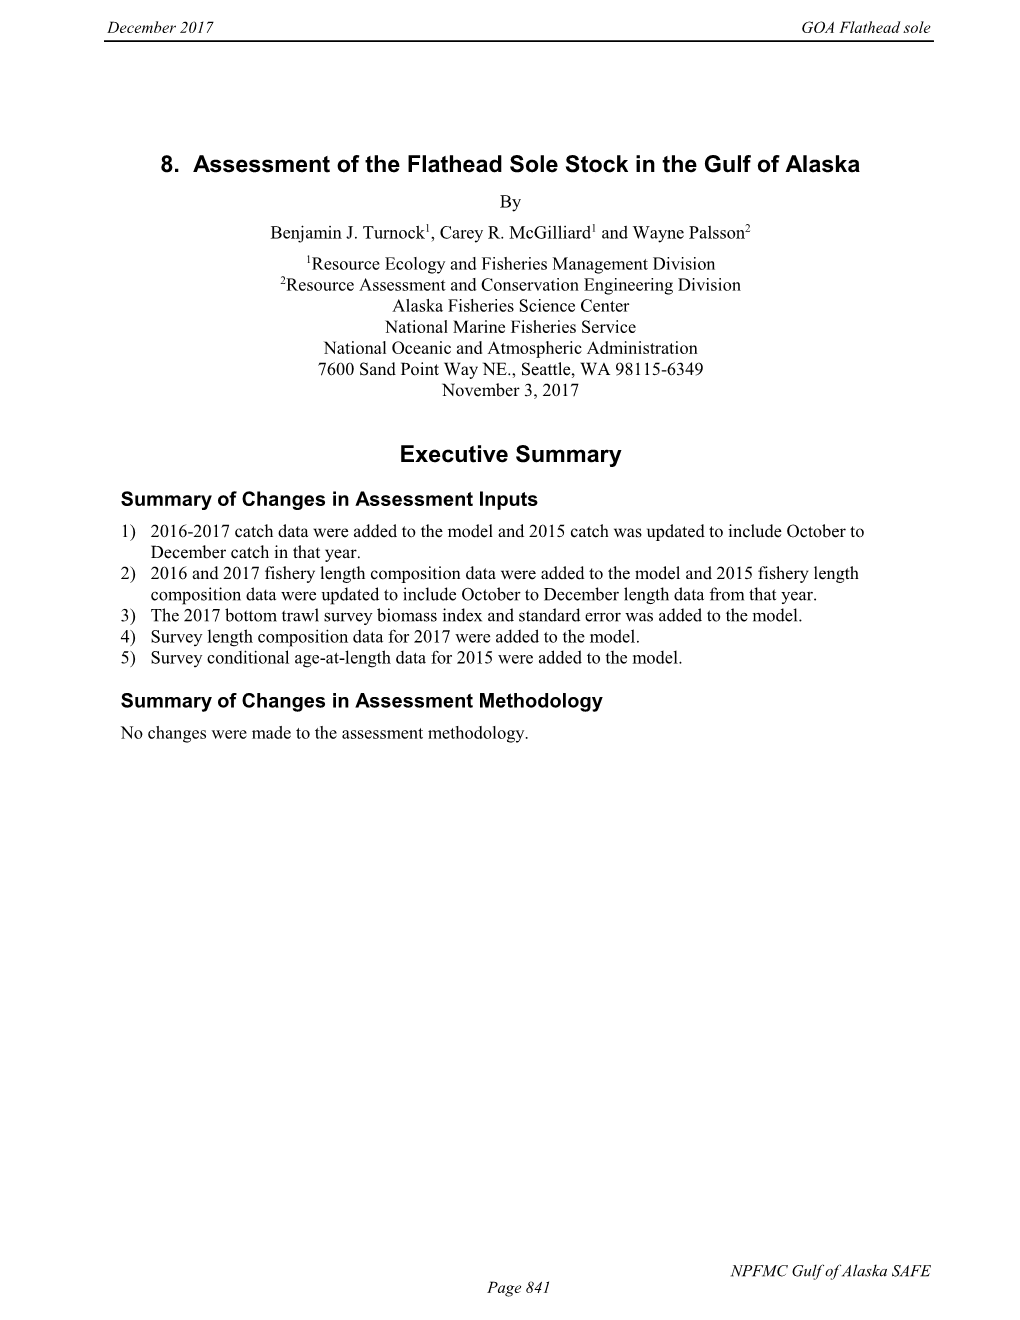 Assessment of the Flathead Sole Stock in the Gulf of Alaska by Benjamin J